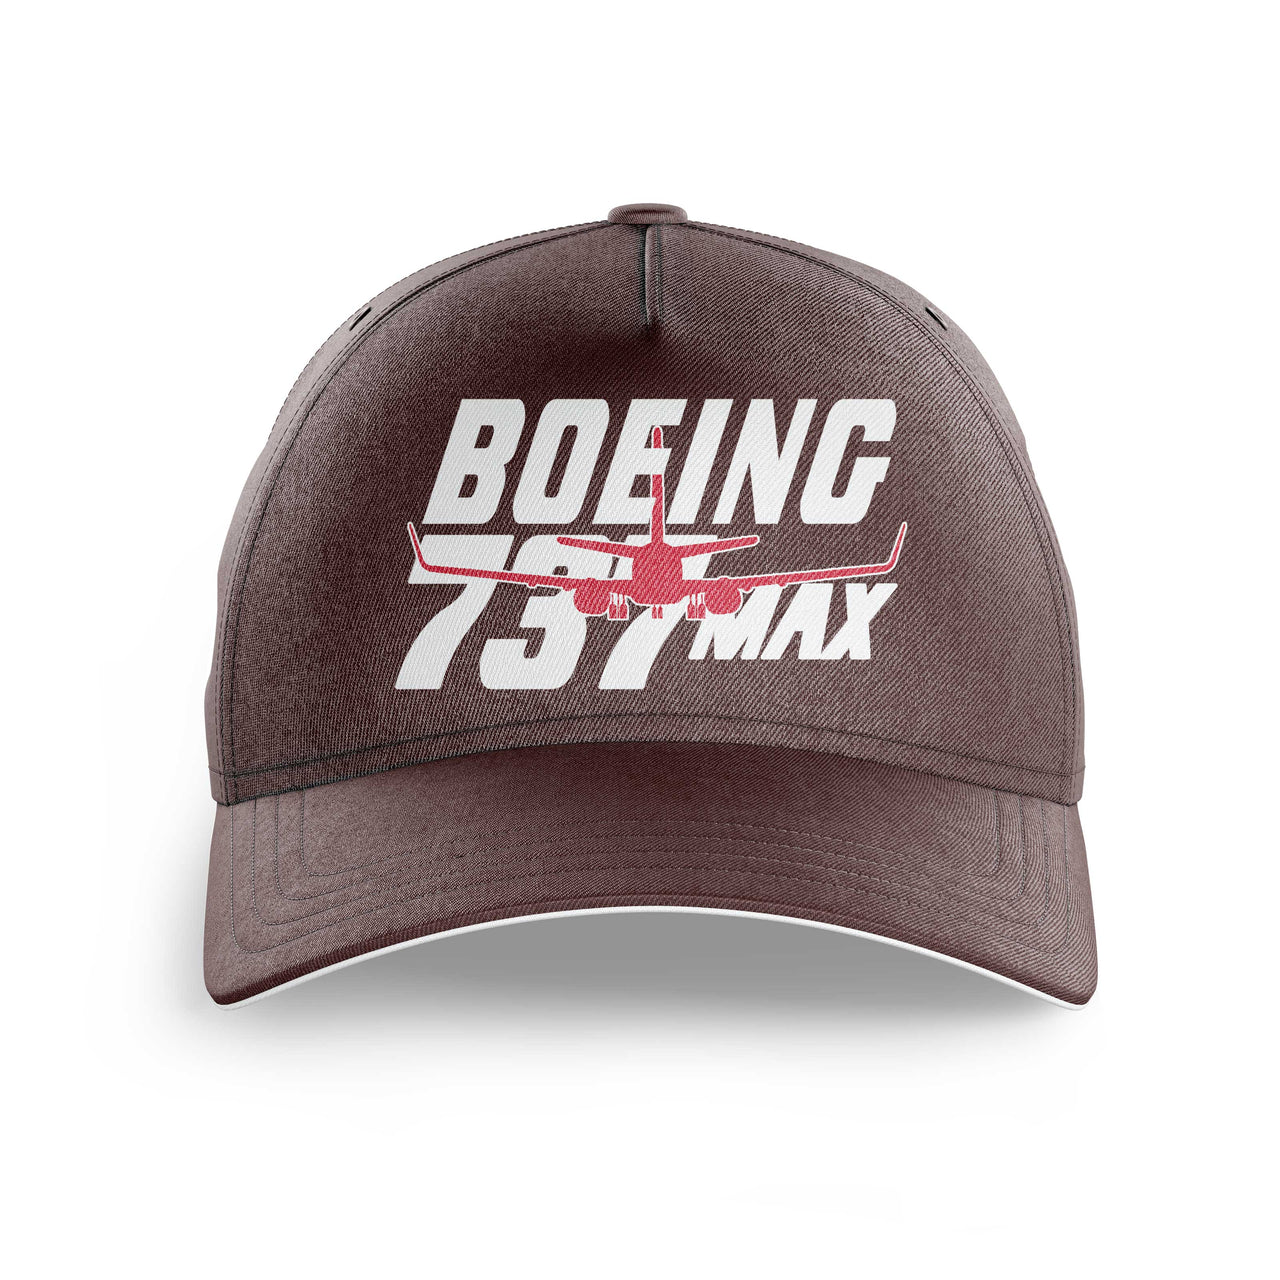 Amazing Boeing 737 Max Printed Hats